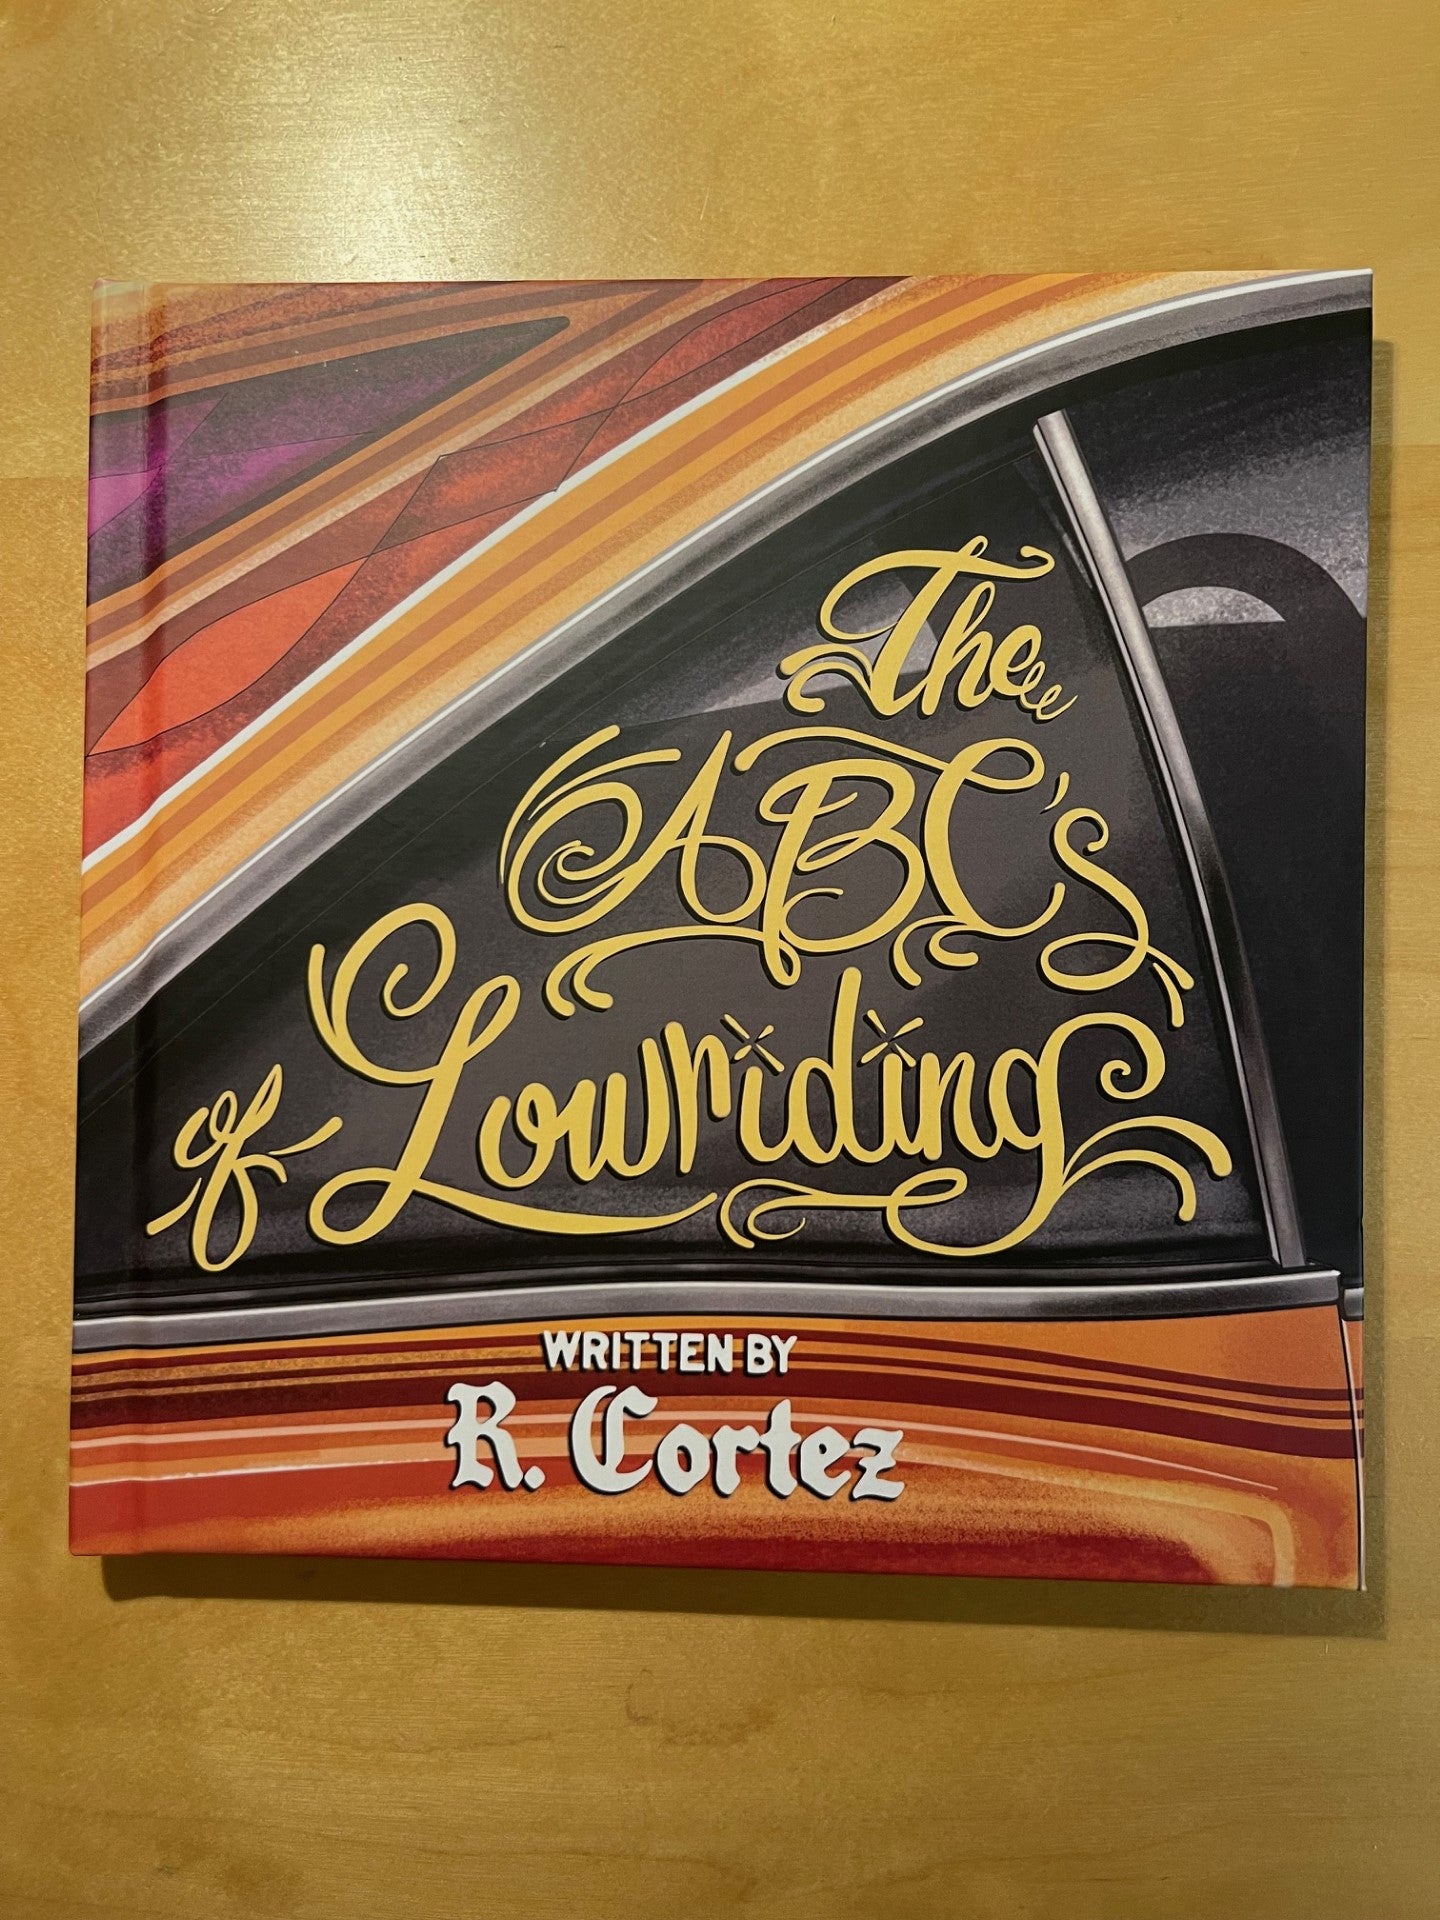 The ABC's of Lowriding by R. Cortez